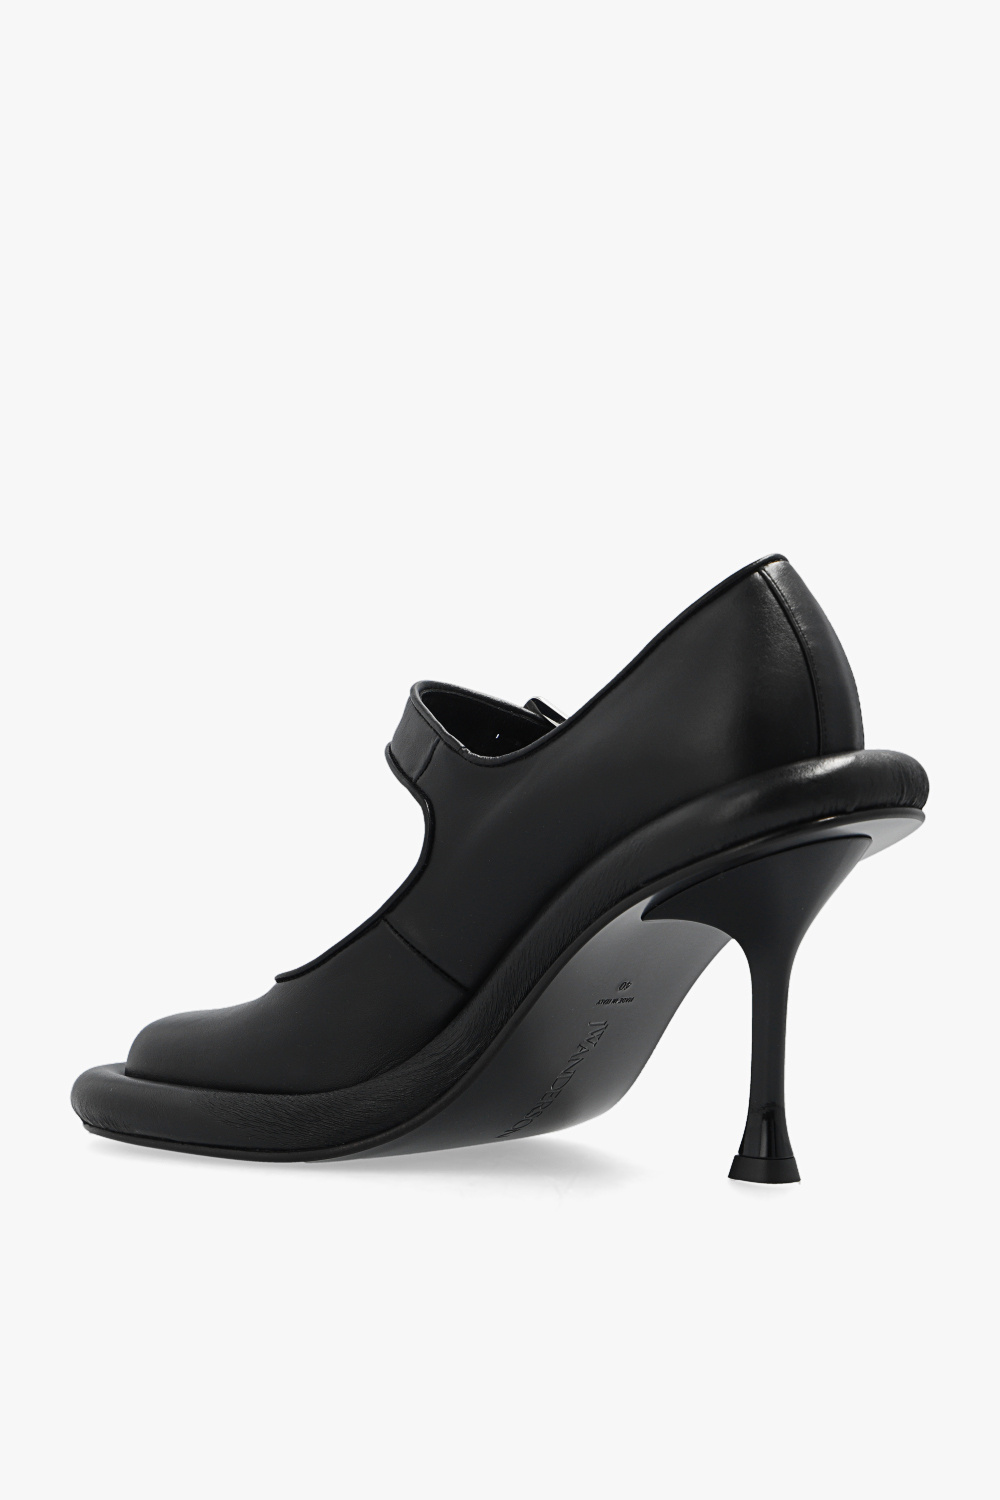 JW Anderson Pumps with strap